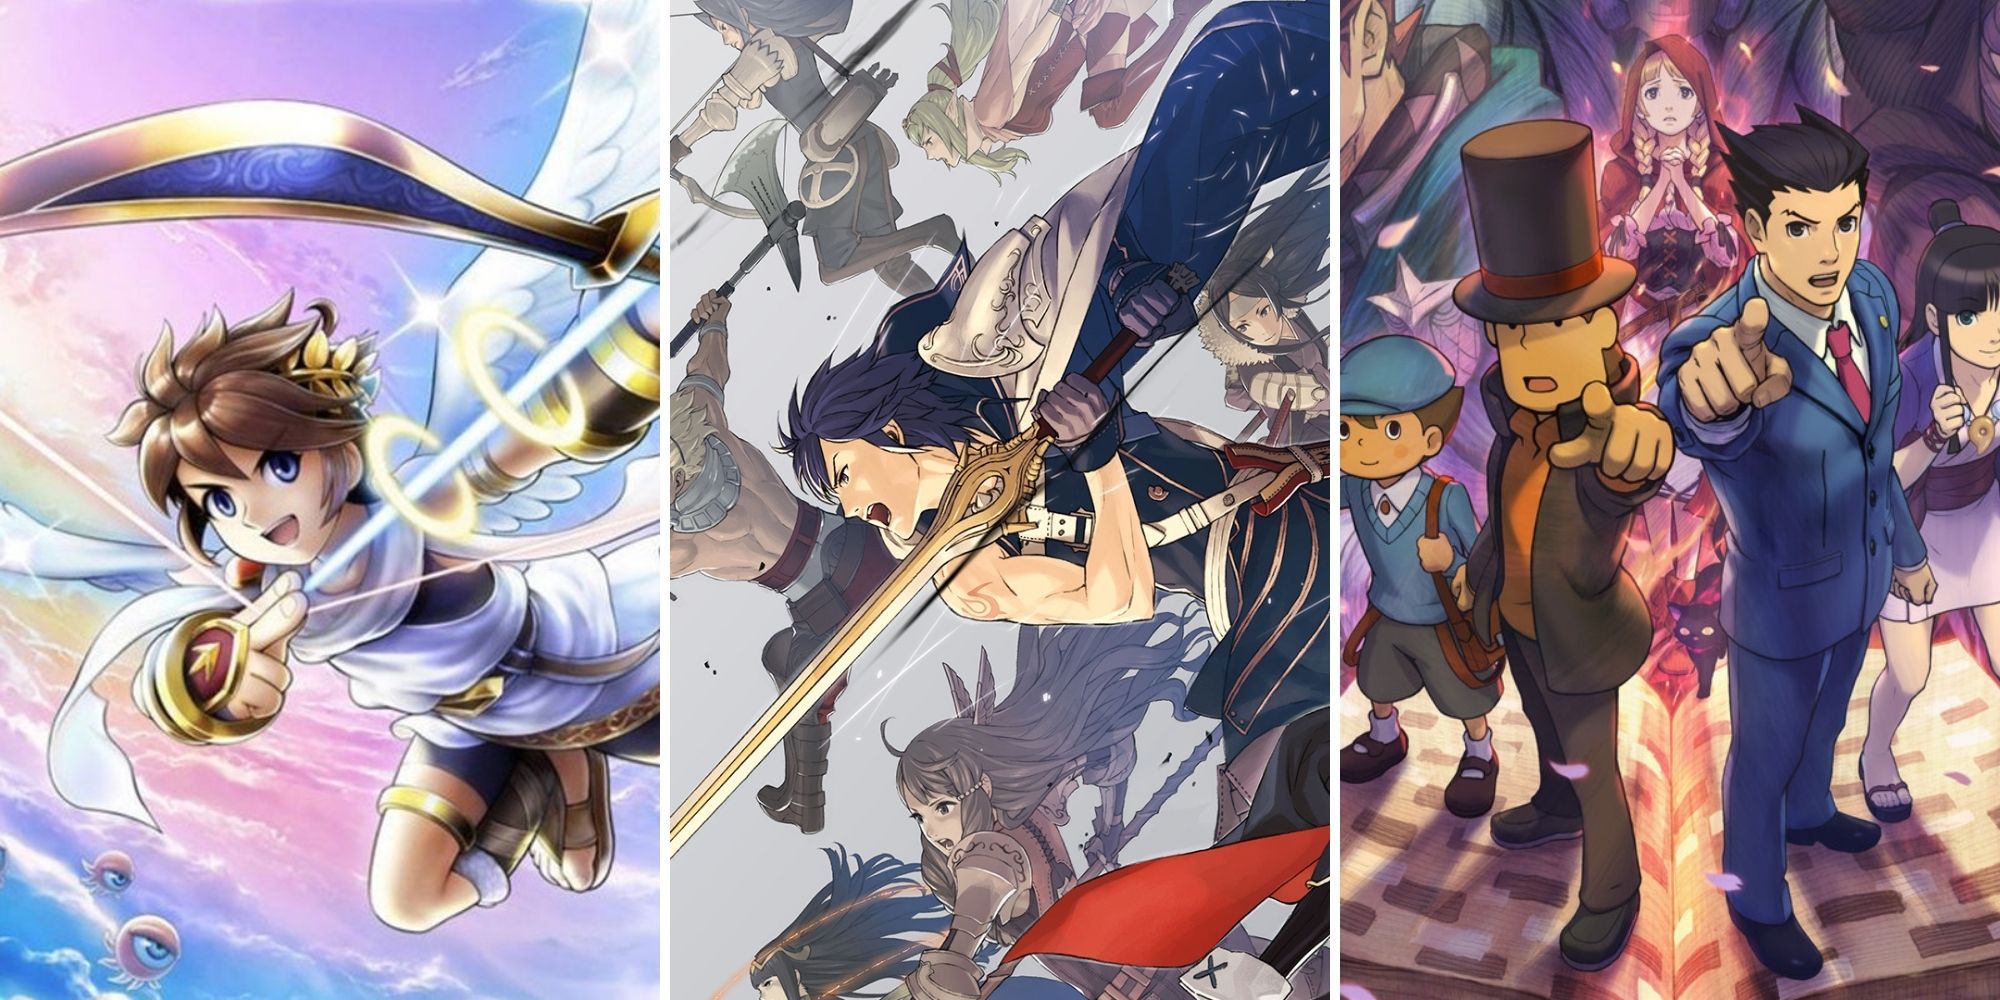 Kid Icarus Pit soars through the sky Fire Emblem Chrom prepares to attack Professor Layton and Pheonix Wright point ahead